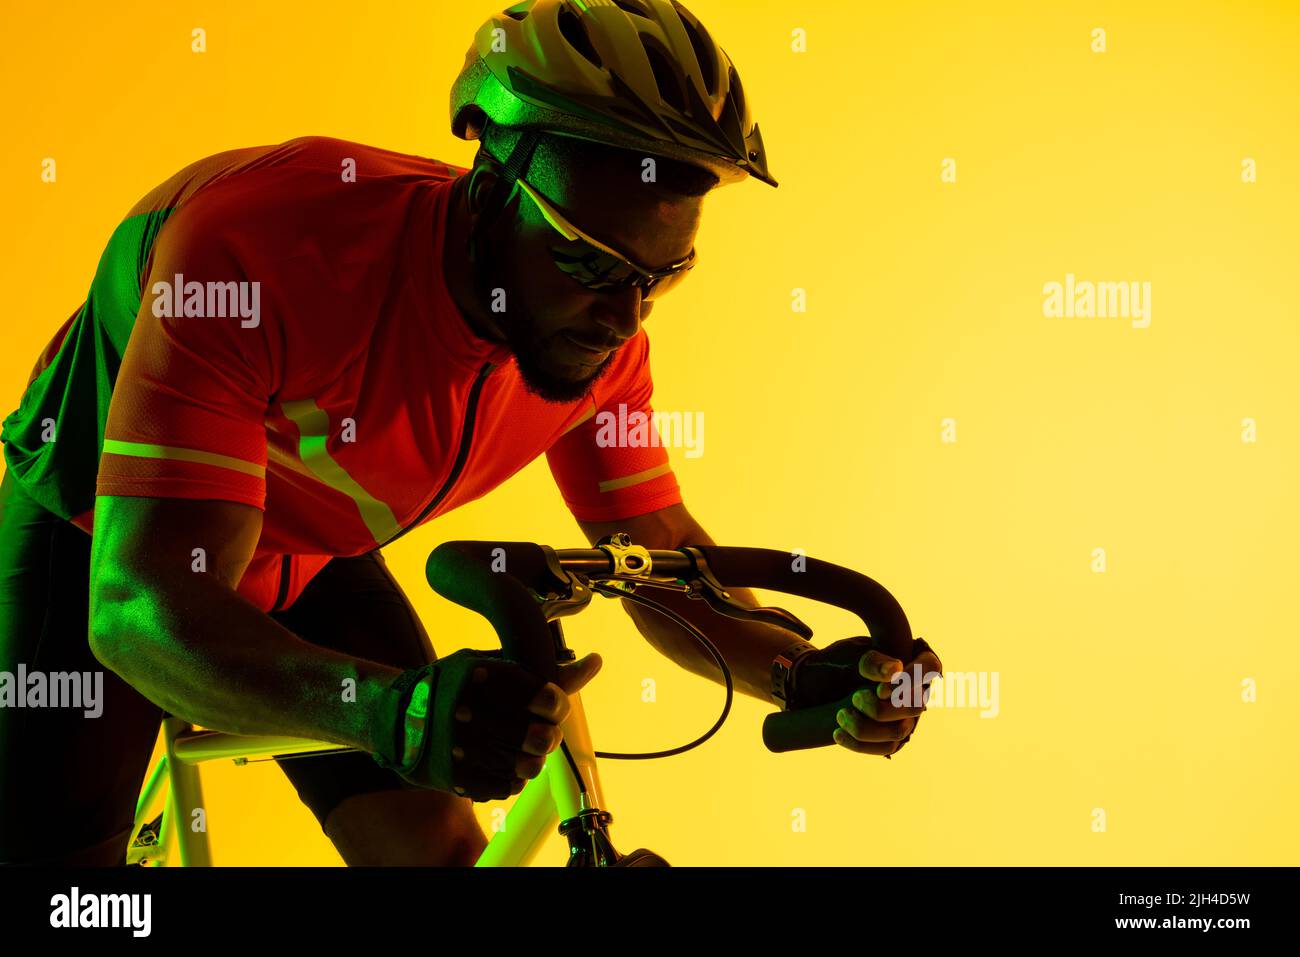 Image of african american male cyclist riding bike in yellow lighting Stock Photo